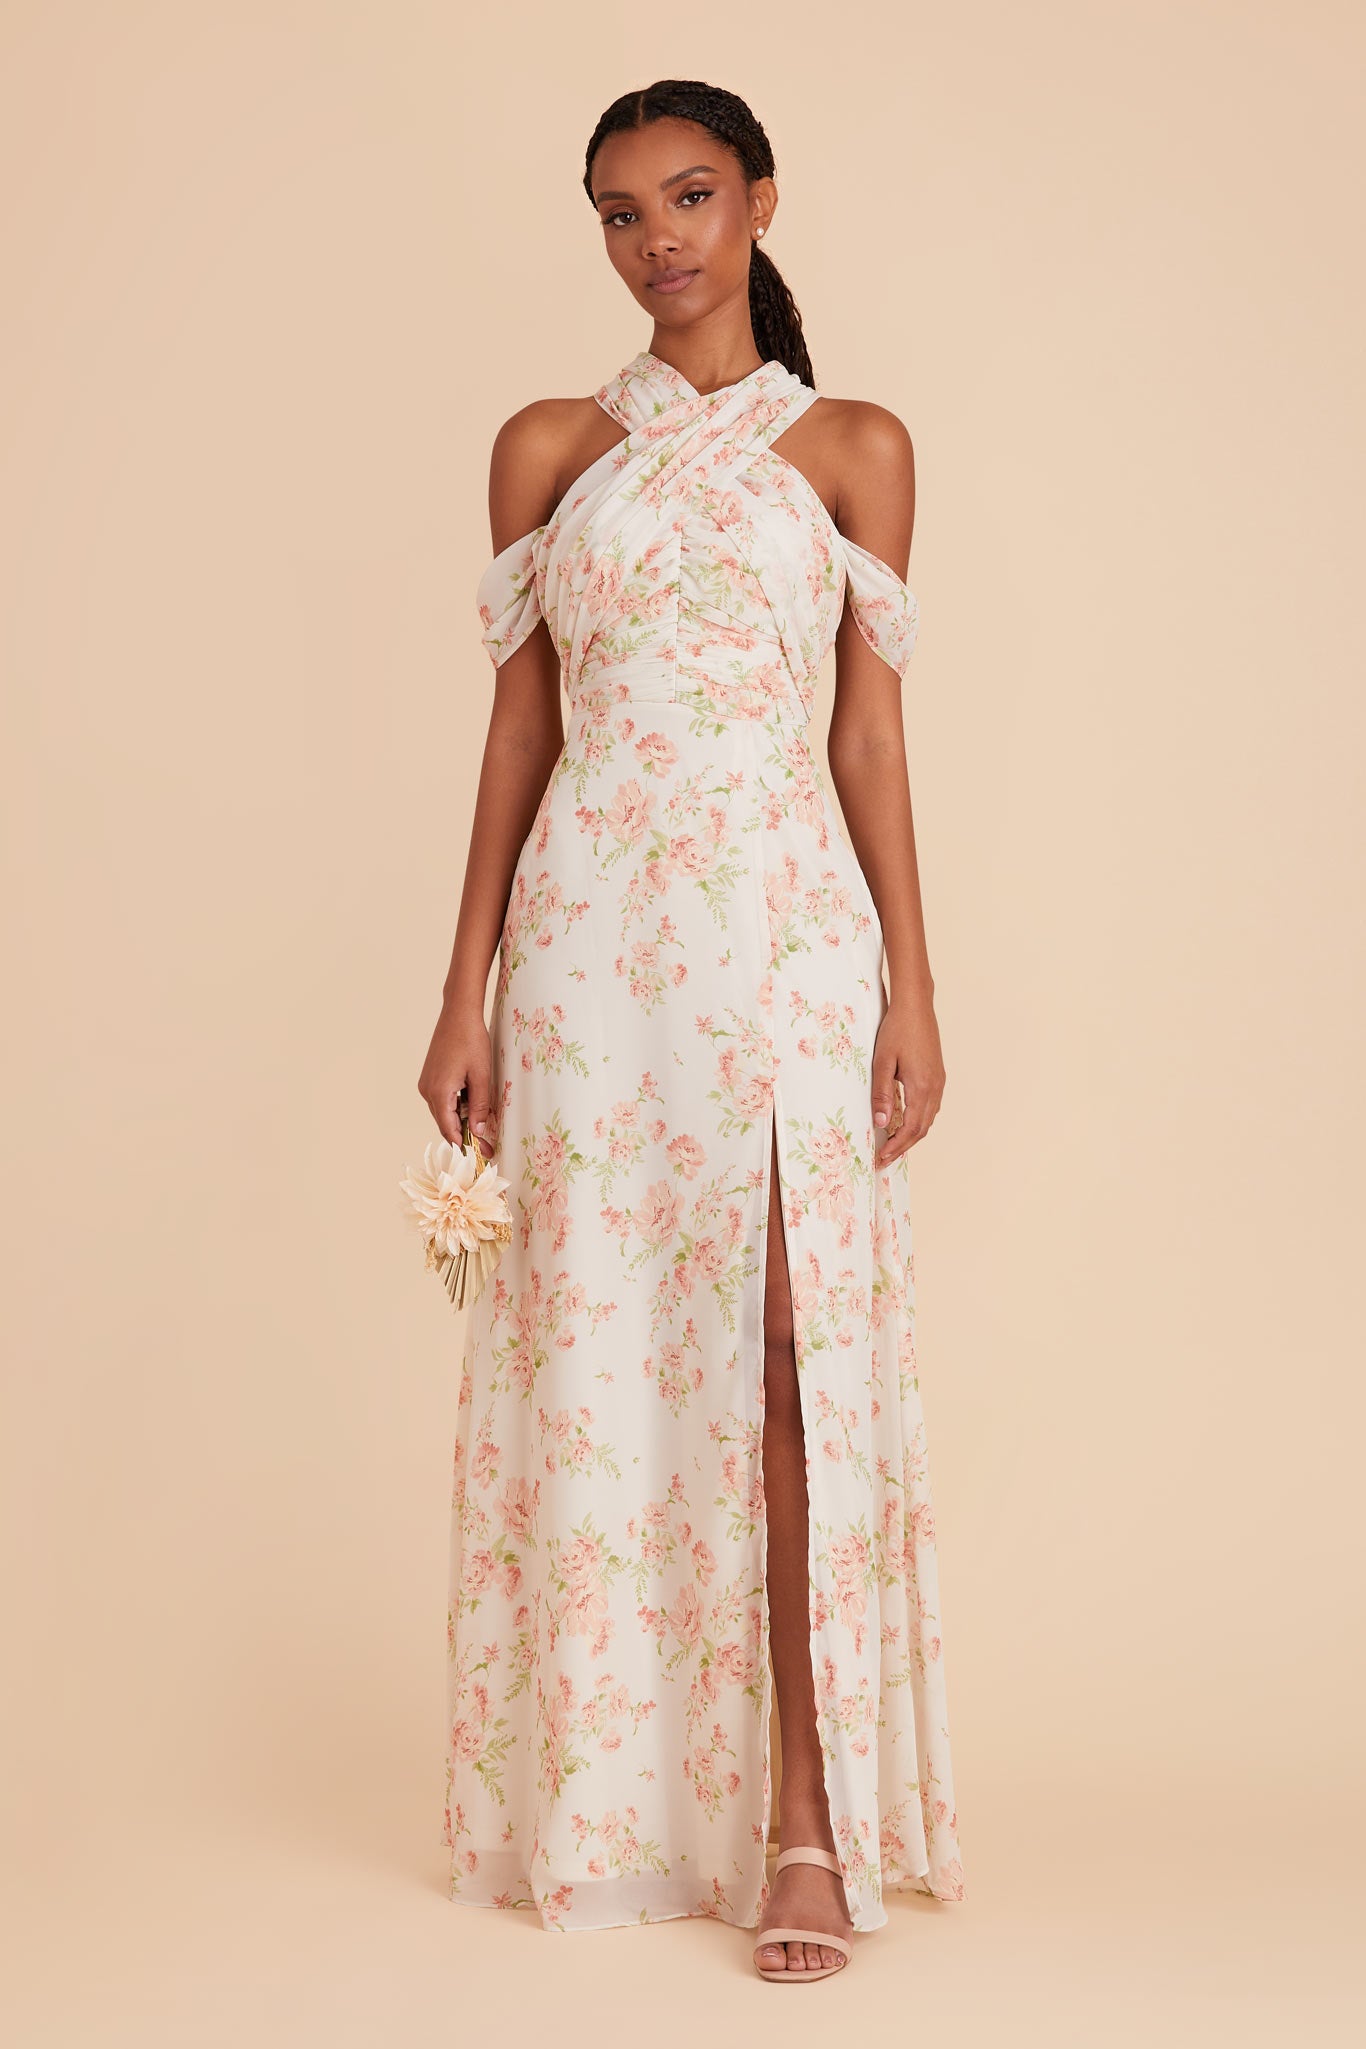 Whimsical Blooms Cara Convertible Dress by Birdy Grey